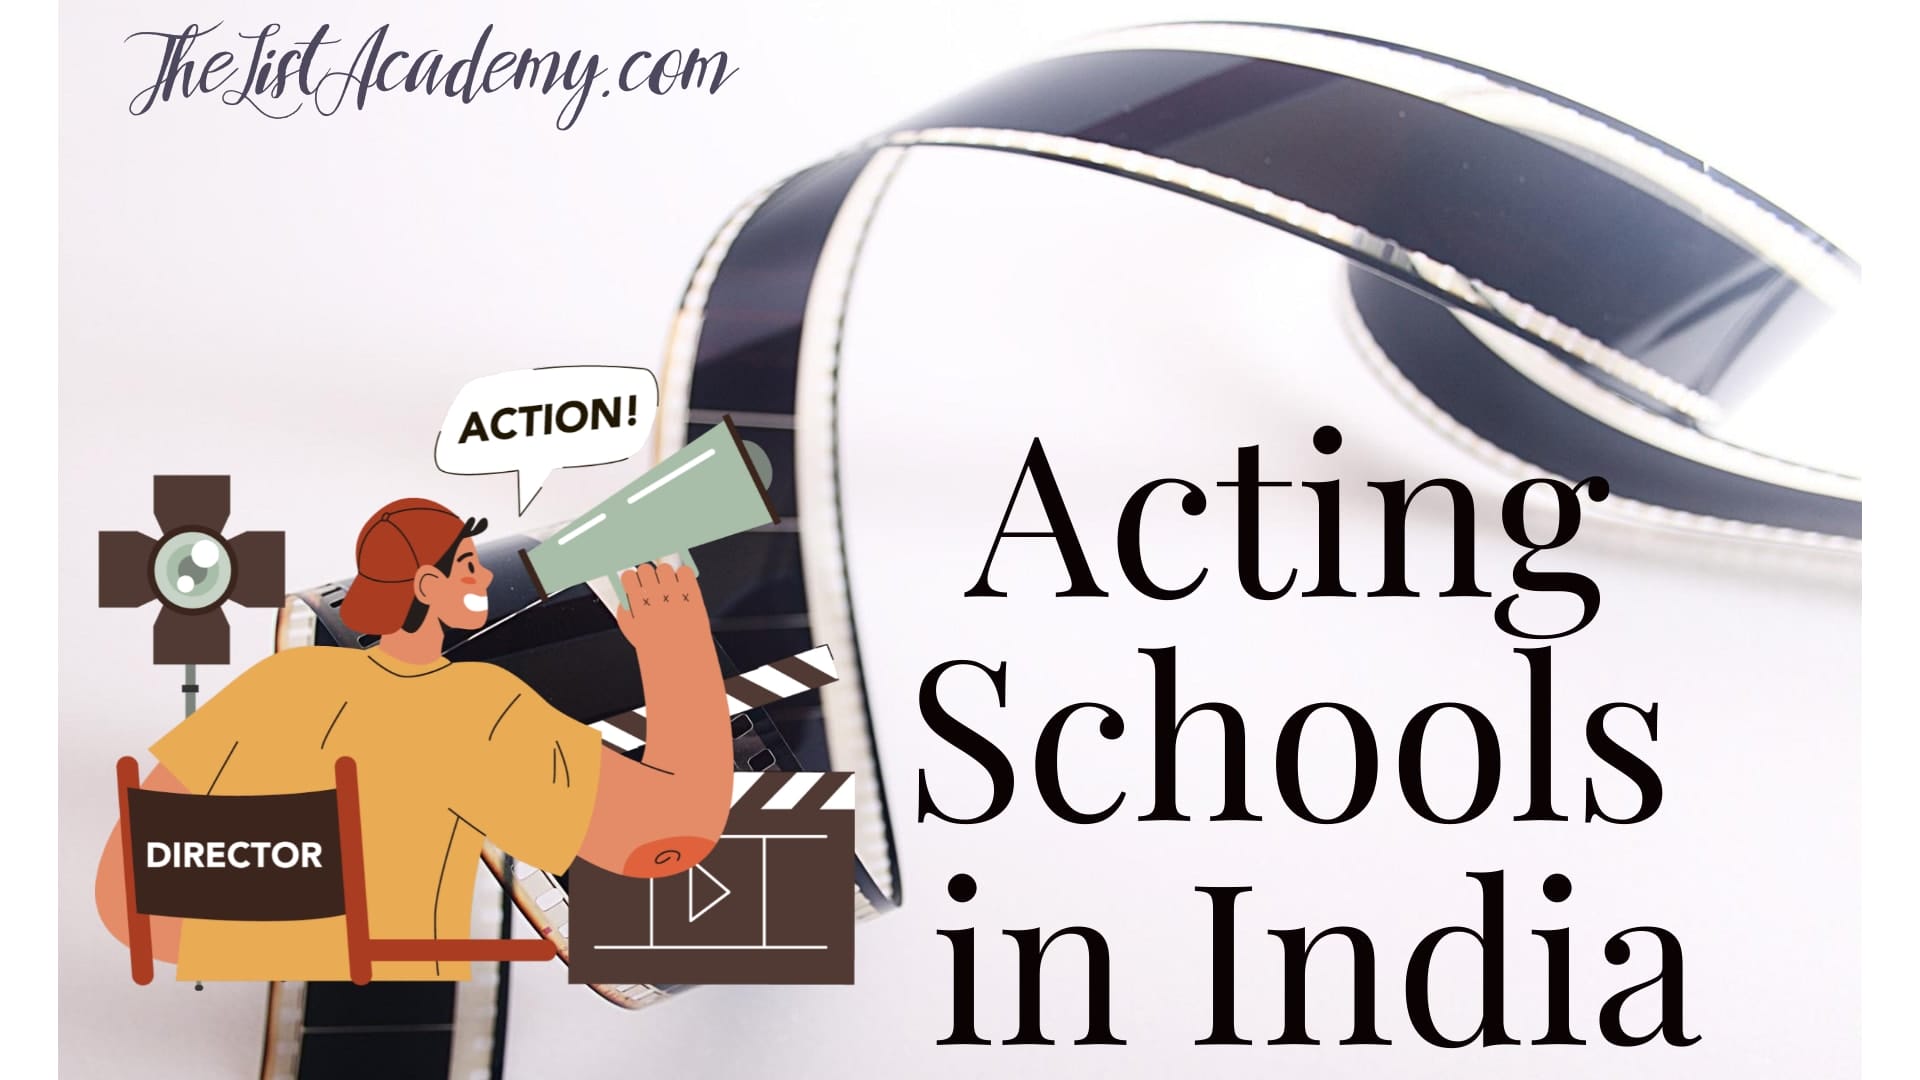 Cover Image For List : Top  26 Acting Schools In India | Best Institutions To Learn Acting In India